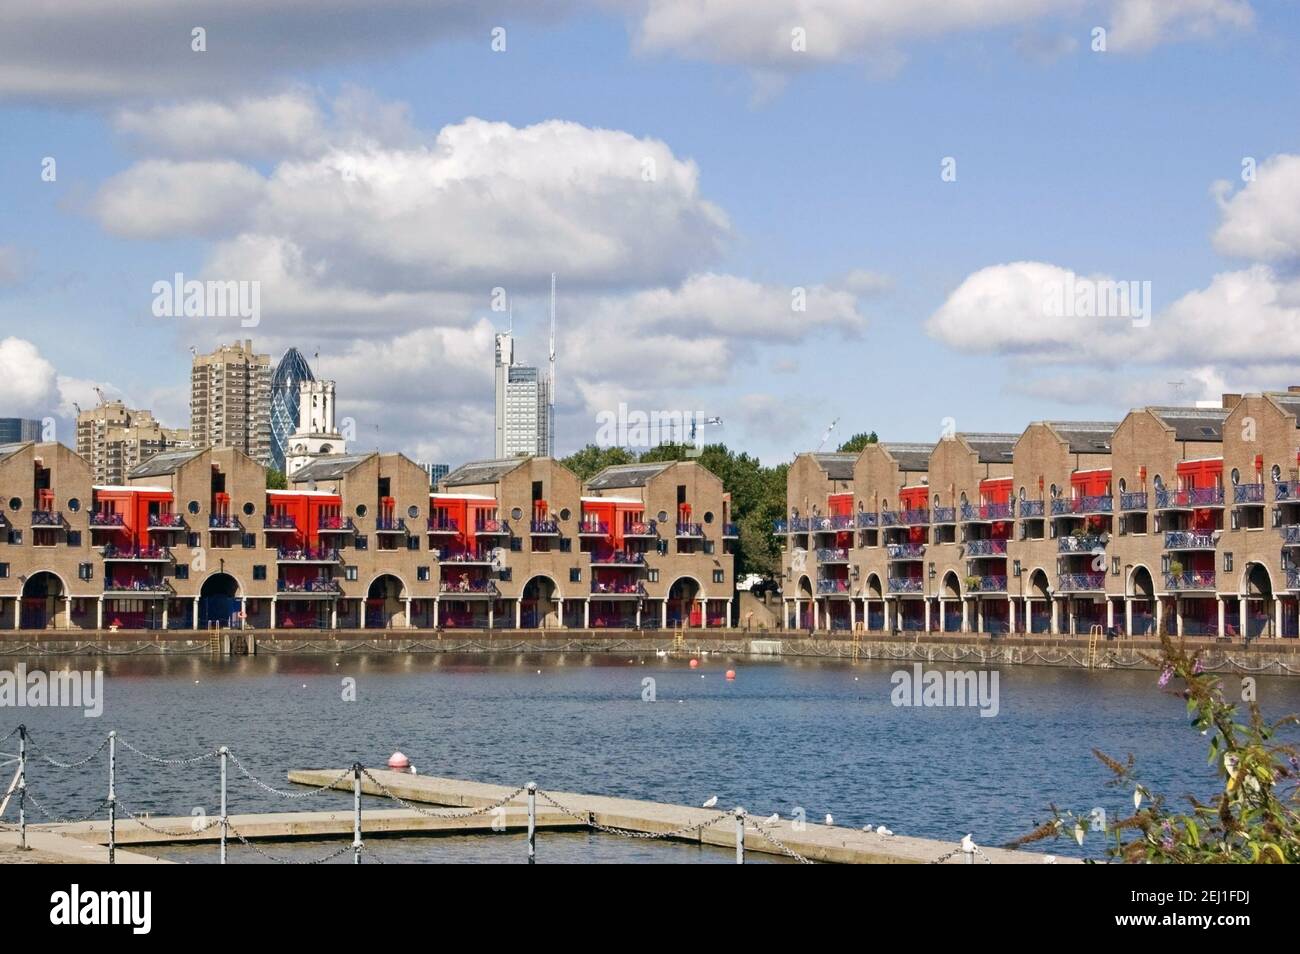 The dockland redevelopment at Shadwell Basin in East London with towers from the City of London financial district in the distance. Stock Photo